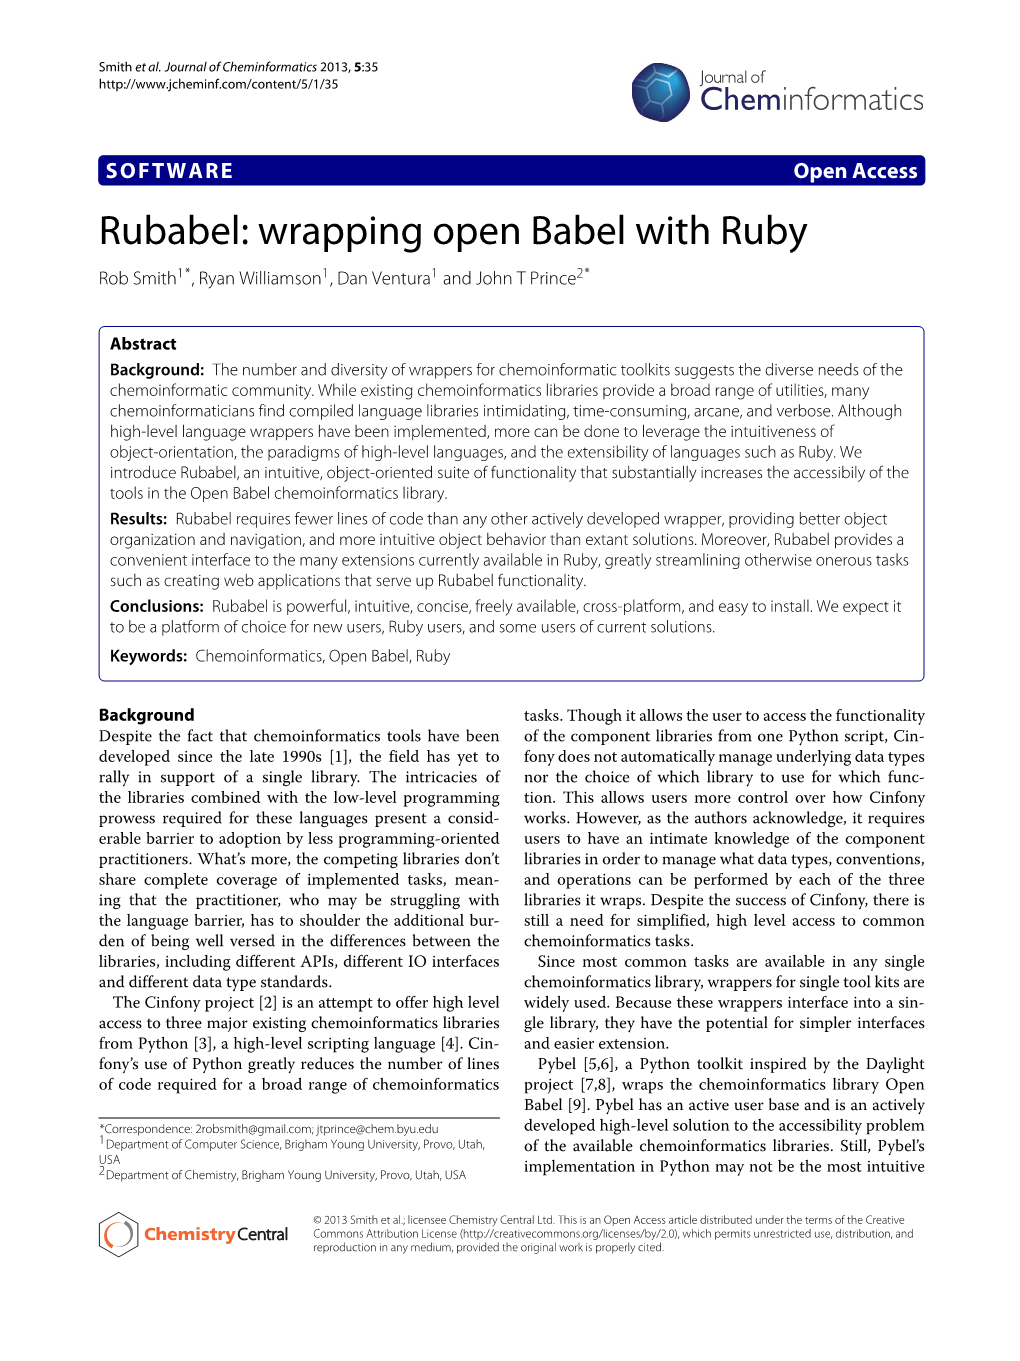 Rubabel: Wrapping Open Babel with Ruby Rob Smith1*, Ryan Williamson1, Dan Ventura1 and John T Prince2*